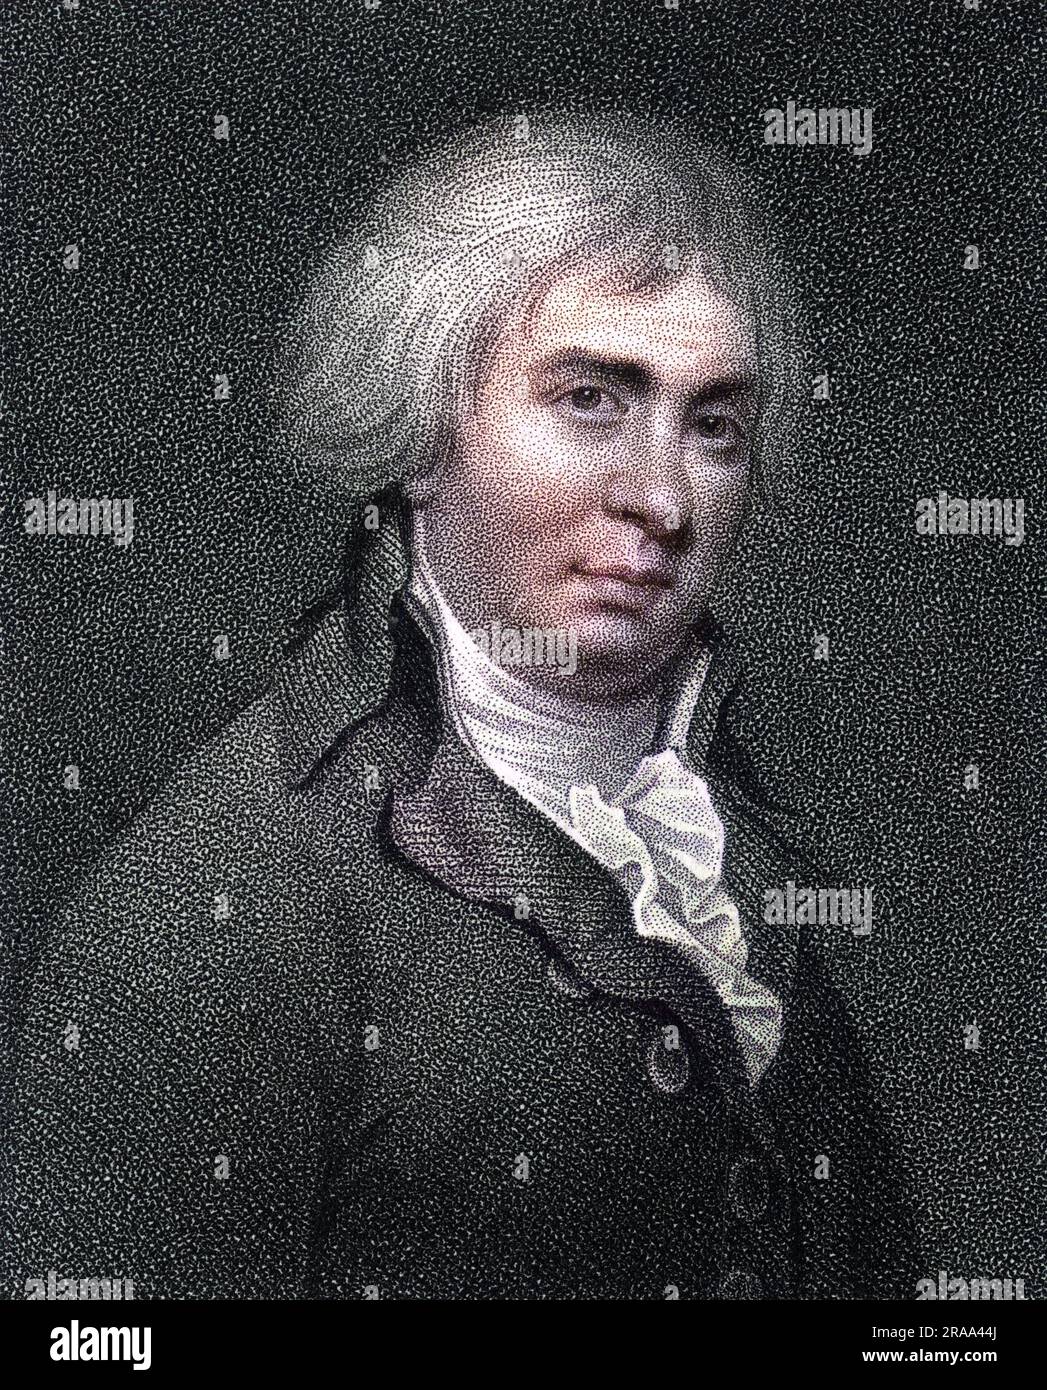 RICHARD BRINSLEY SHERIDAN Playwright, whose 'The rivals' and 'The school for scandal' have proved enduring classics.     Date: 1751 - 1816 Stock Photo